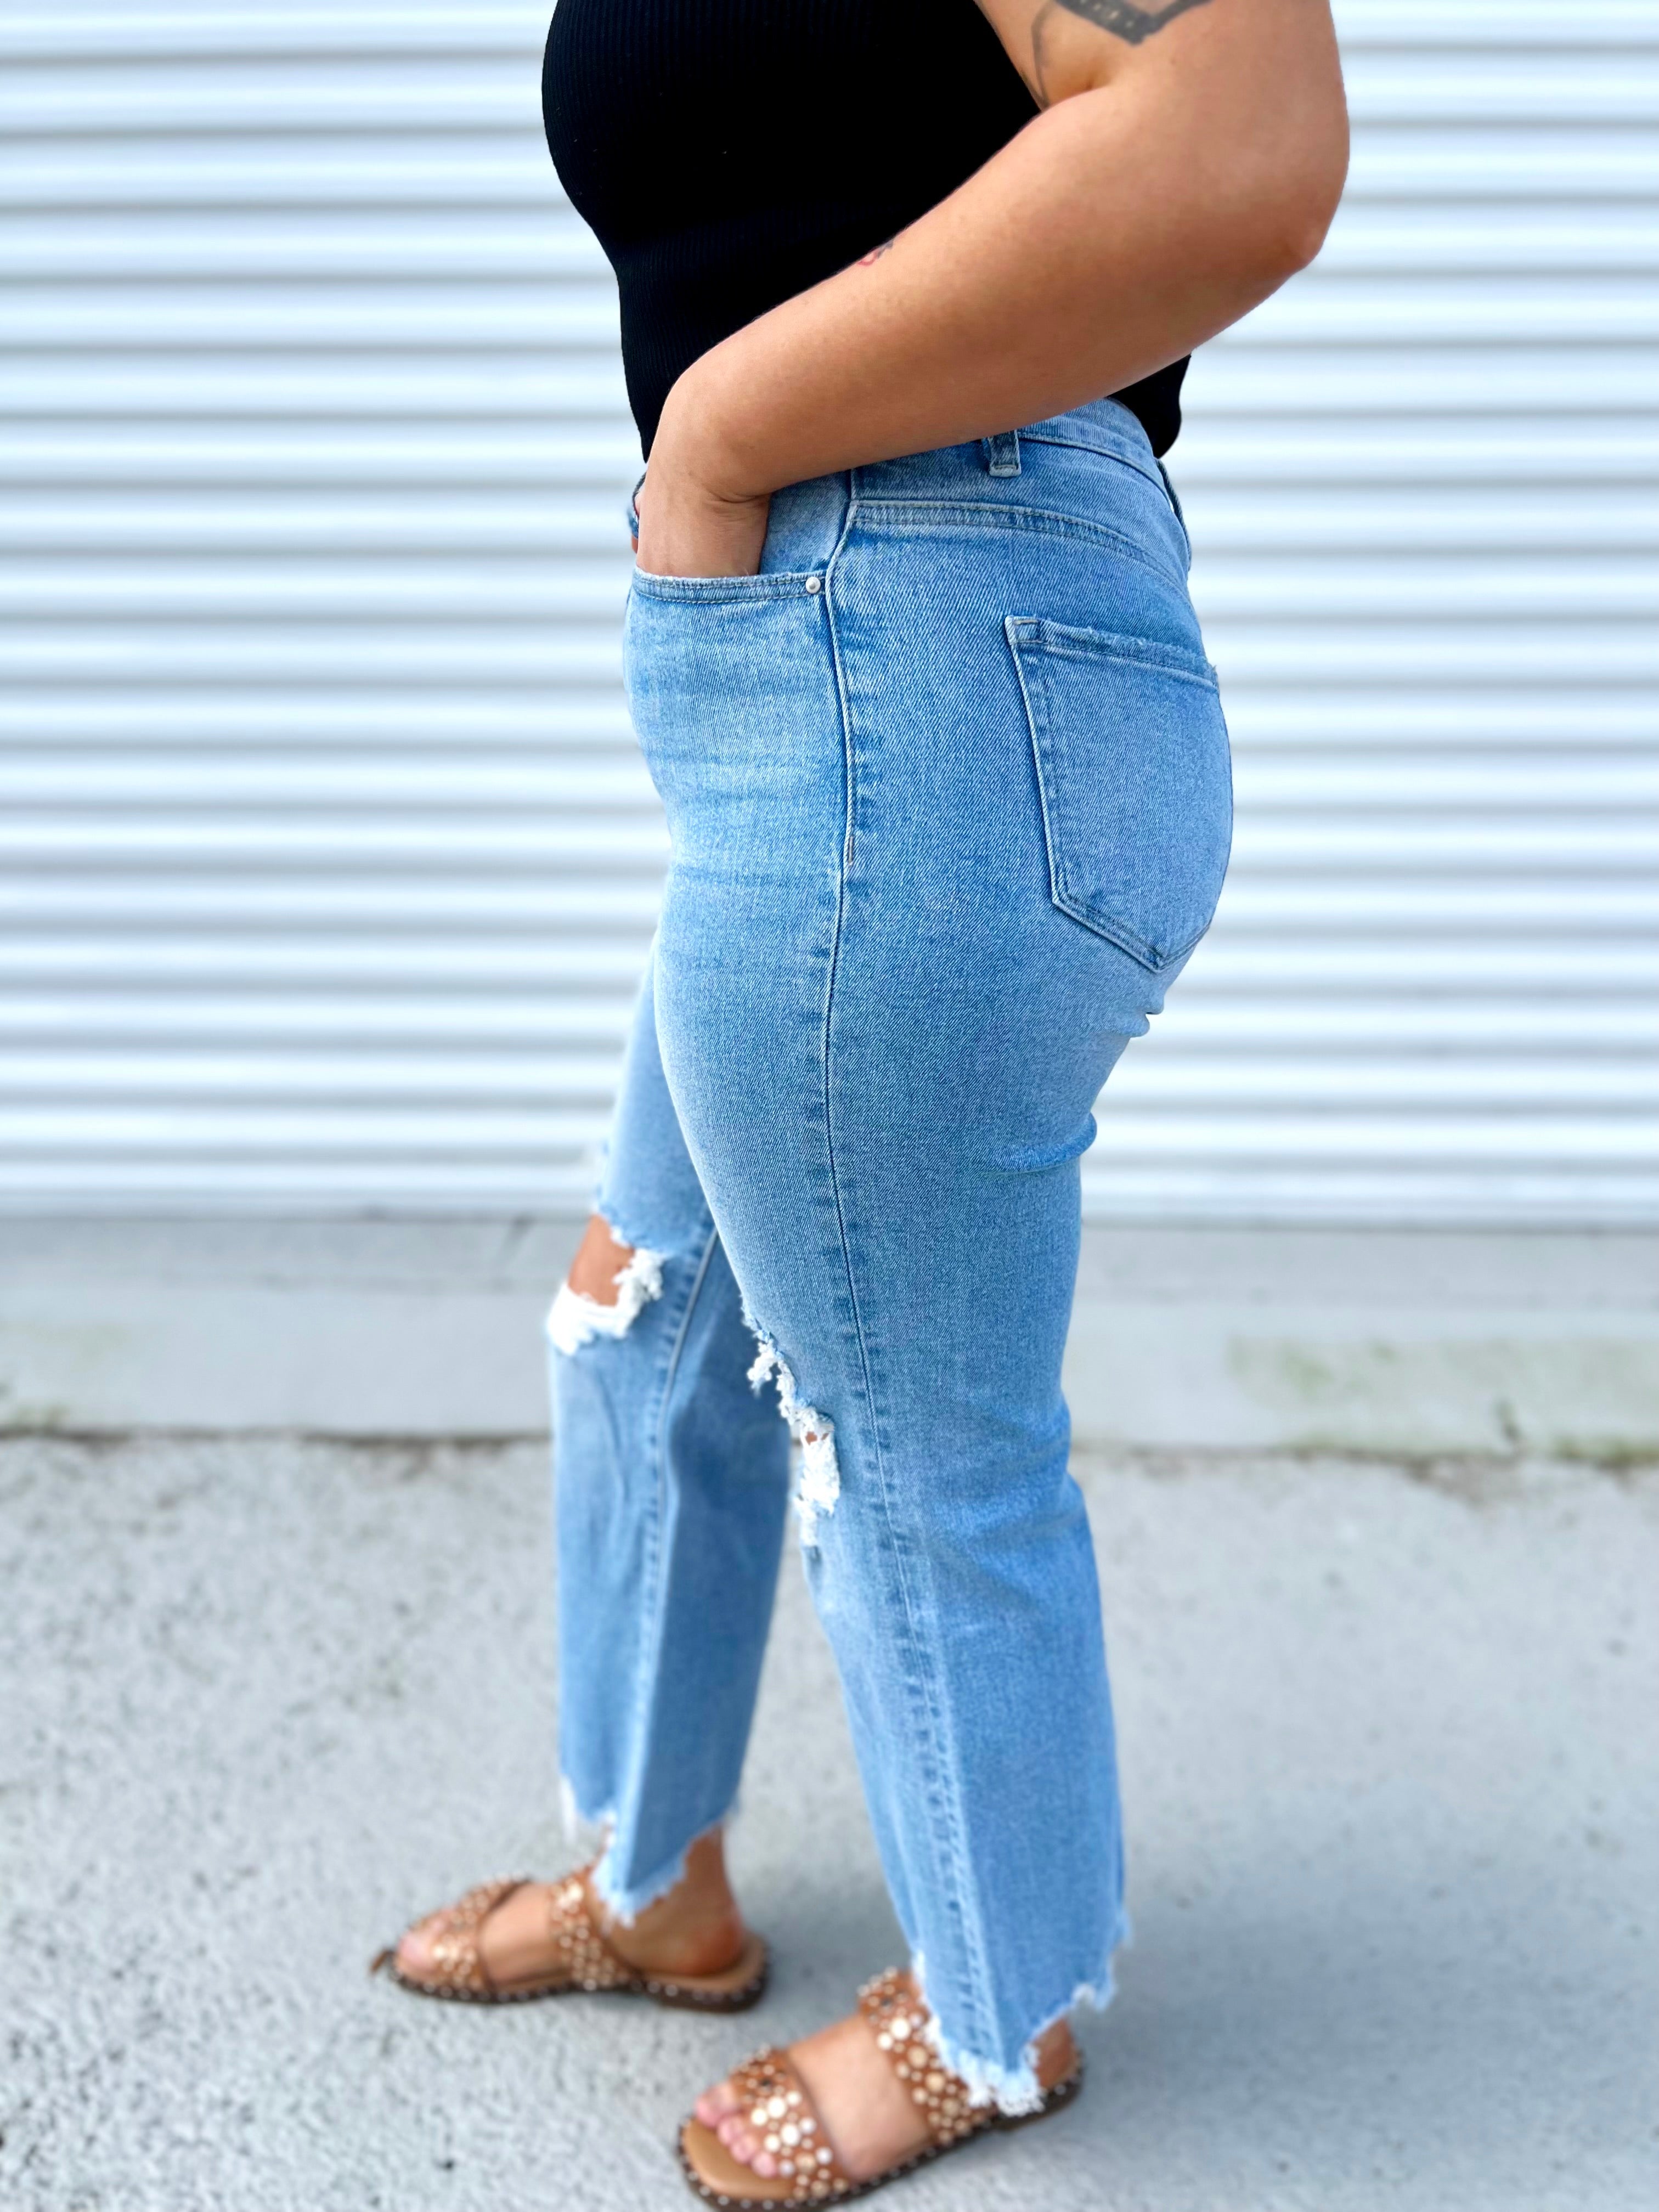 Flash Back Vintage Crop Flare Jeans by Mica-190 Jeans-Mica Denim-Heathered Boho Boutique, Women's Fashion and Accessories in Palmetto, FL